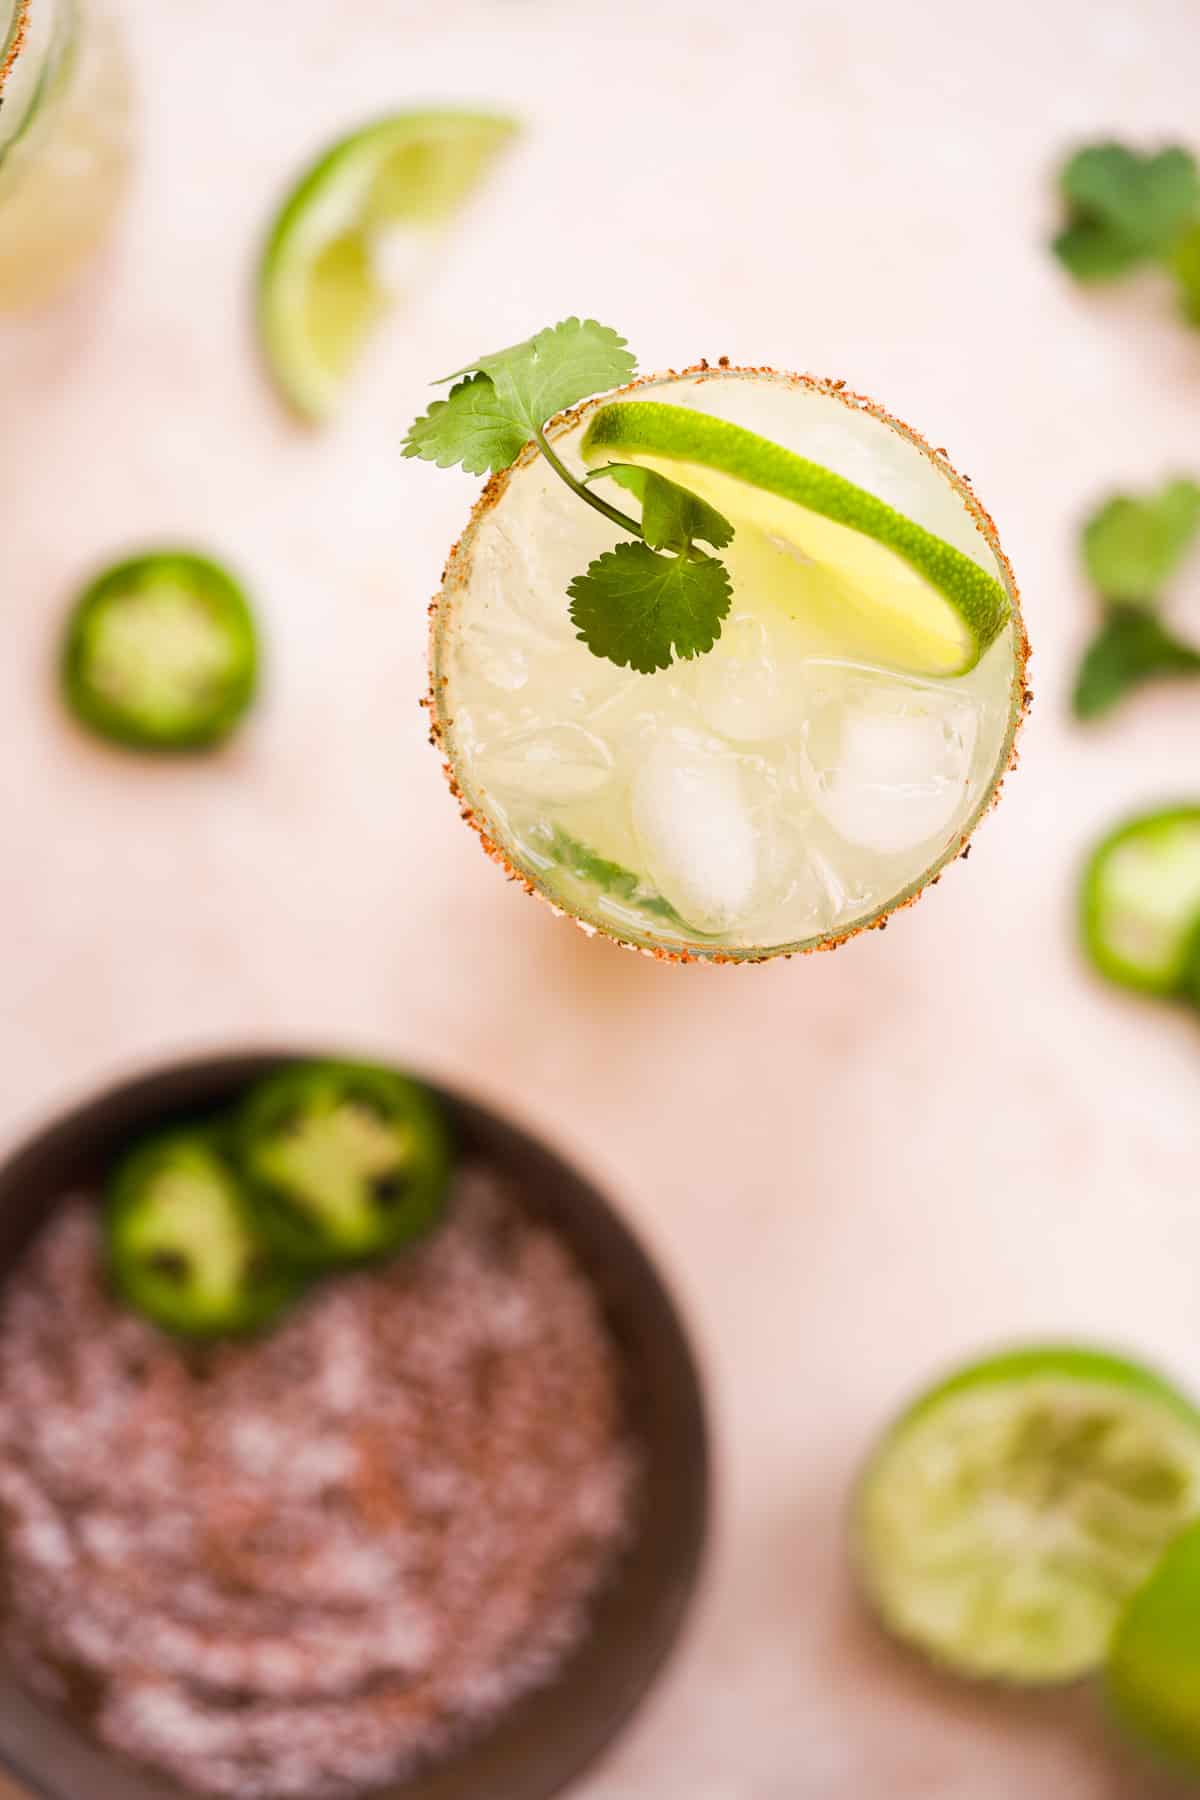 Overhead view of a cocktail glass with a lime wedge and cilantro stem inside.